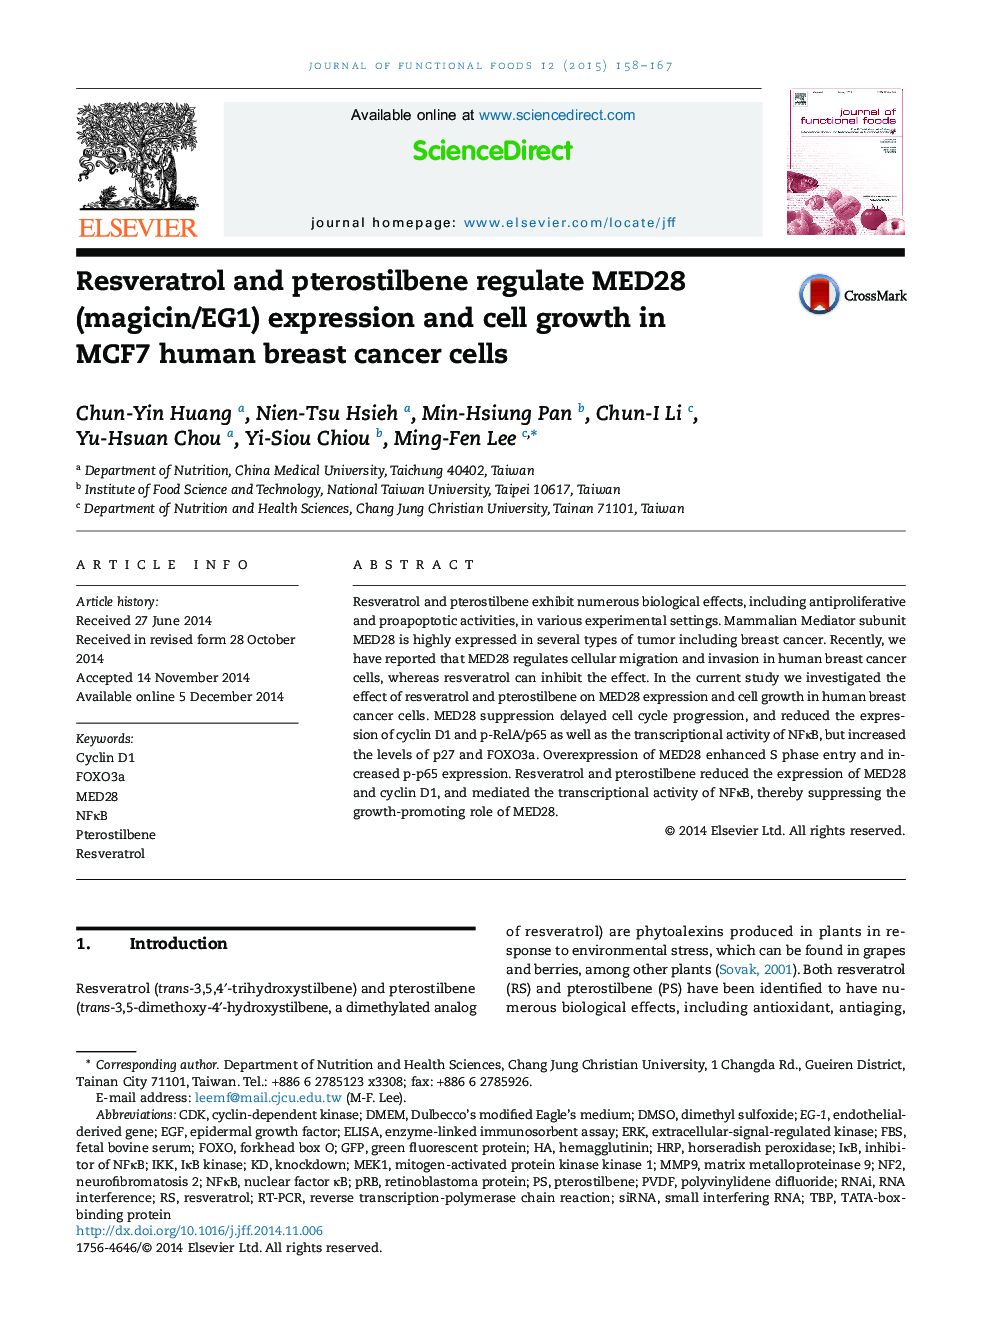 Resveratrol and pterostilbene regulate MED28 (magicin/EG1) expression and cell growth in MCF7 human breast cancer cells